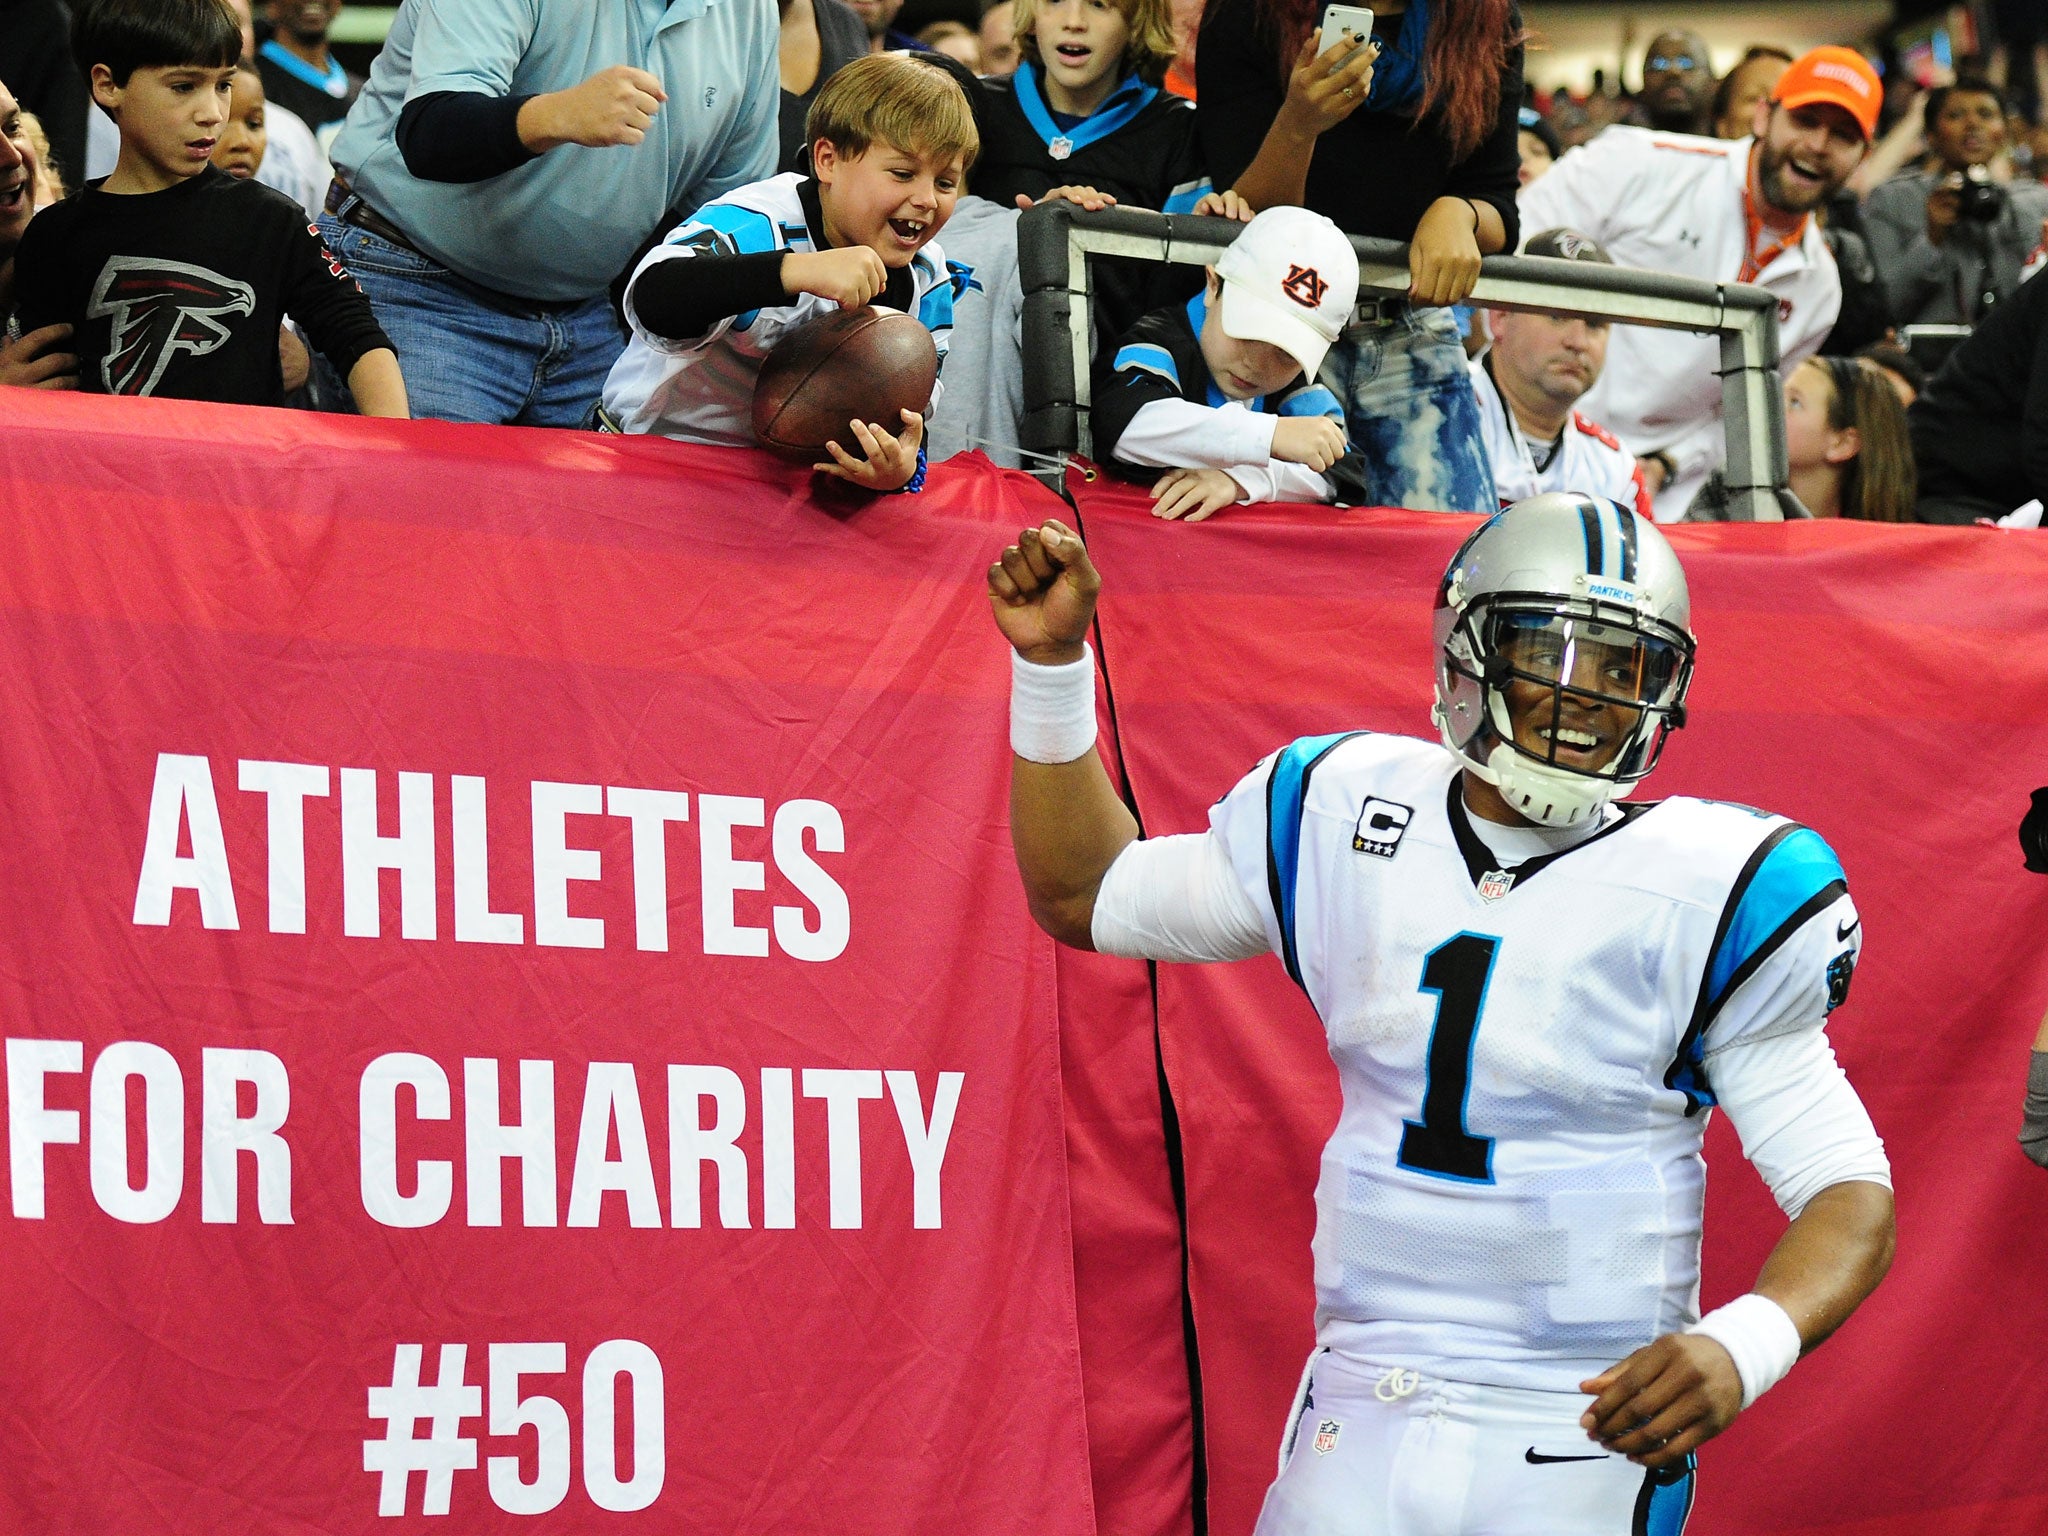 Carolina Panthers quarterback Cam Newton gives the ball to a young fan after running in a touchdown